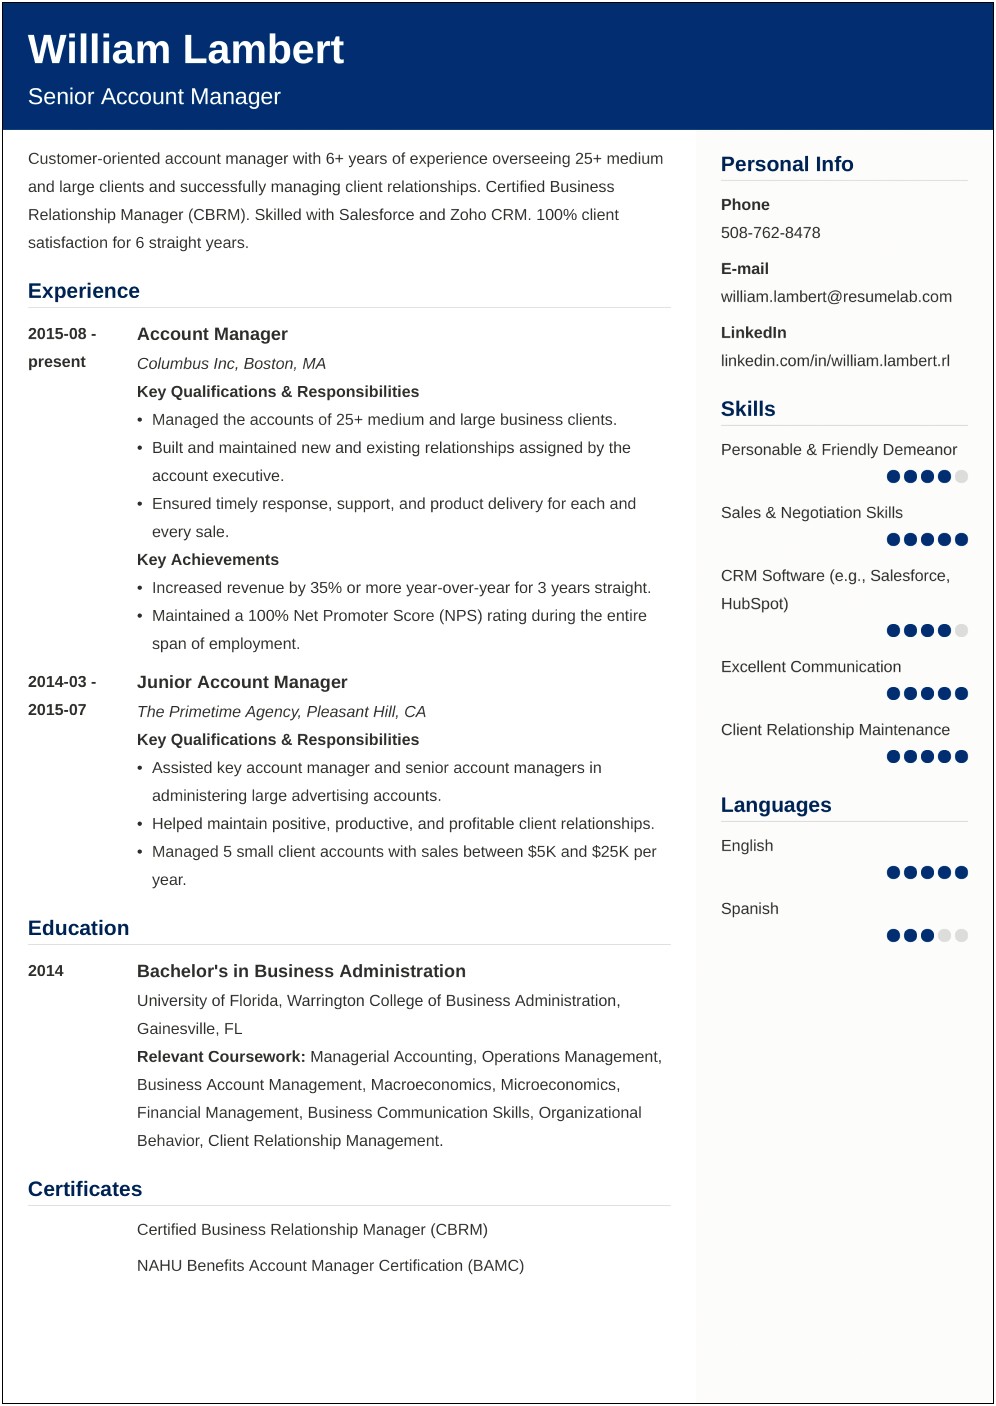 Best Resume Templates With Skilss